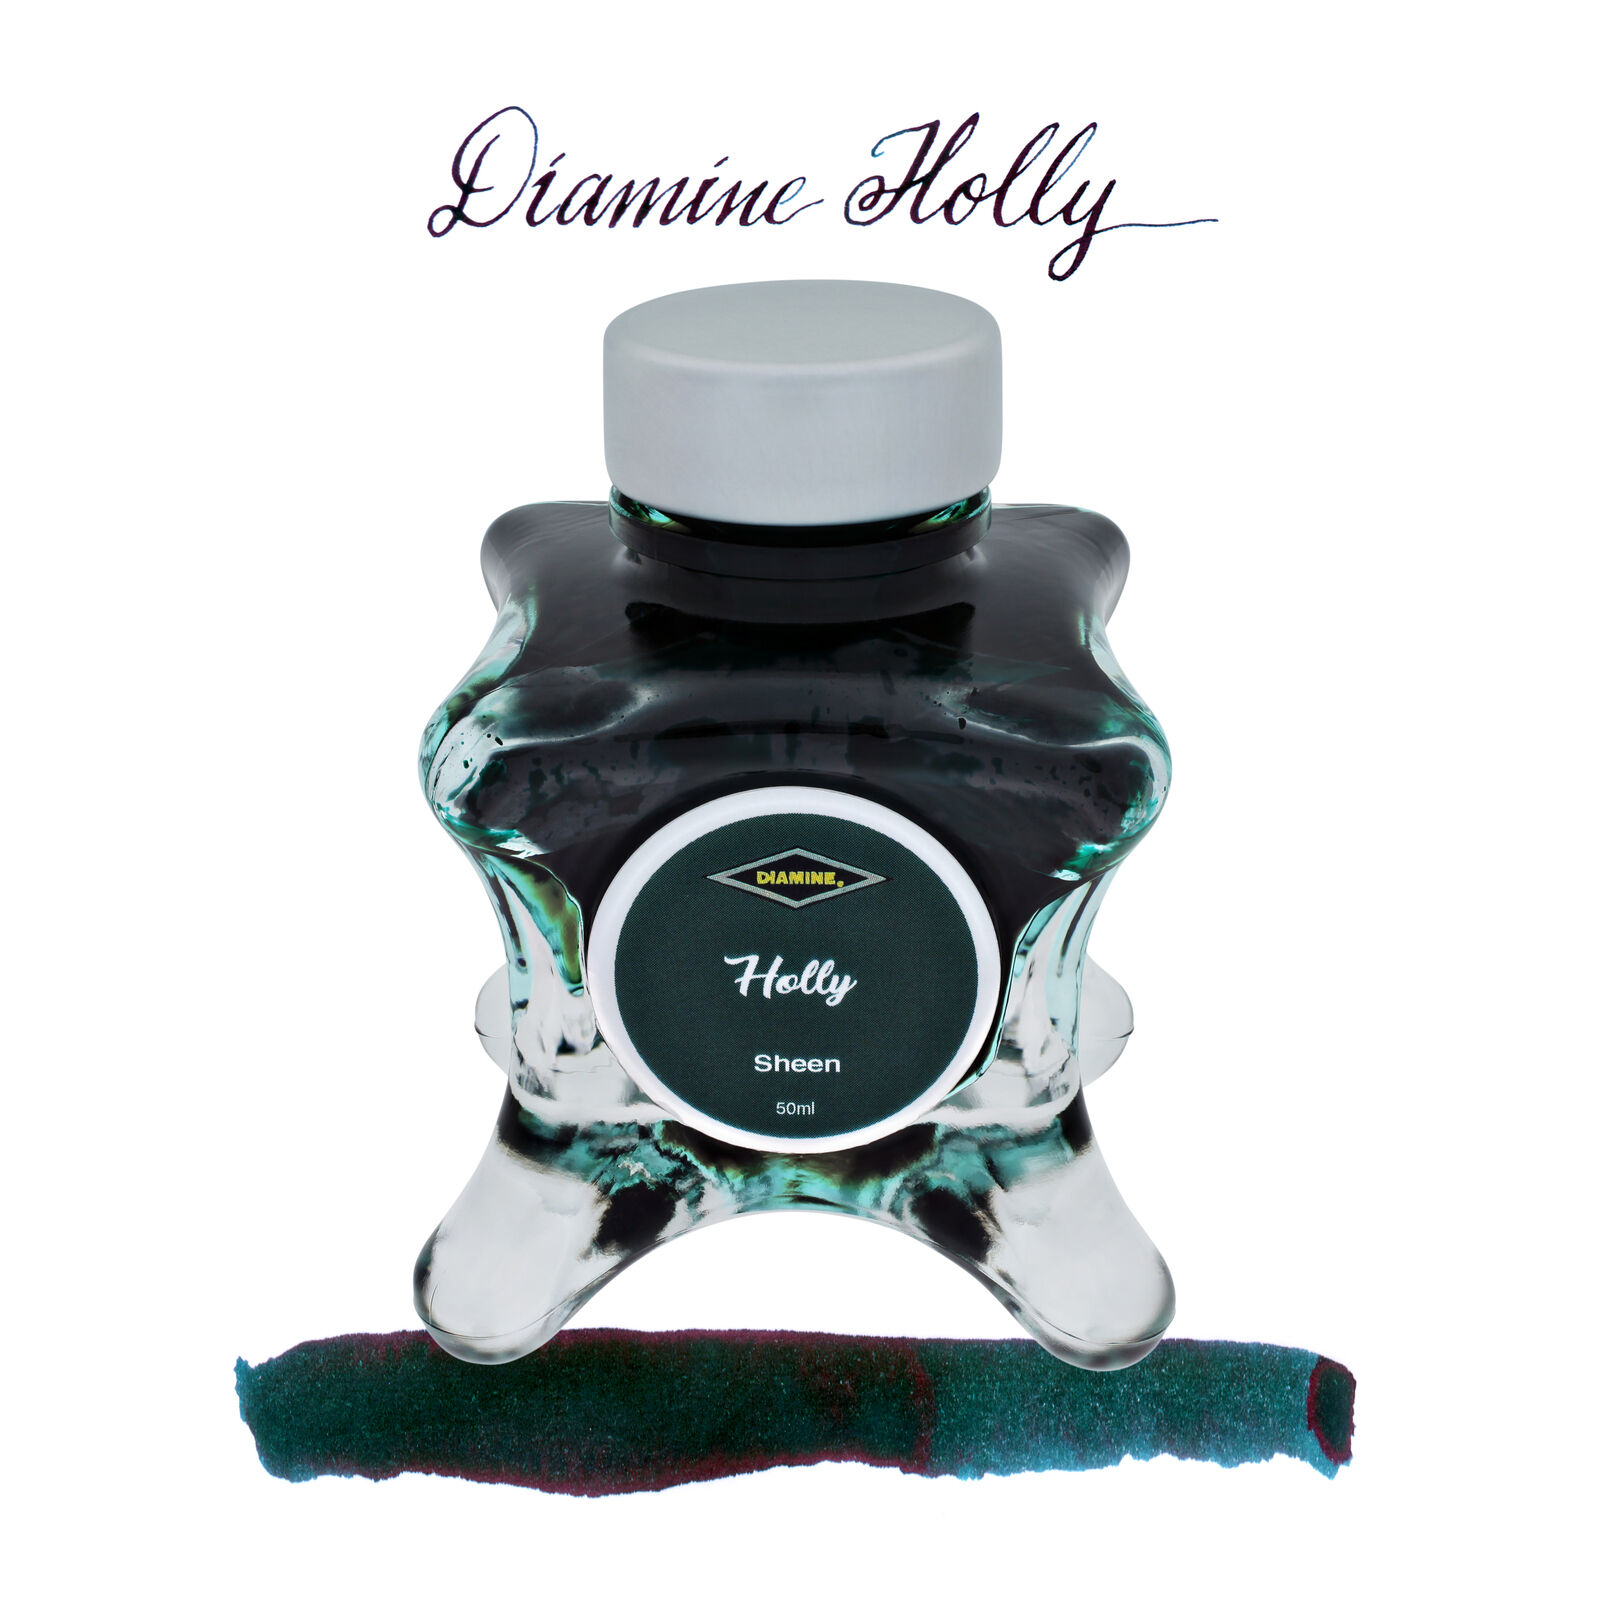 Diamine Inkvent Blue Edition Sheen Bottled Ink in Holly - 50 mL - NEW in box